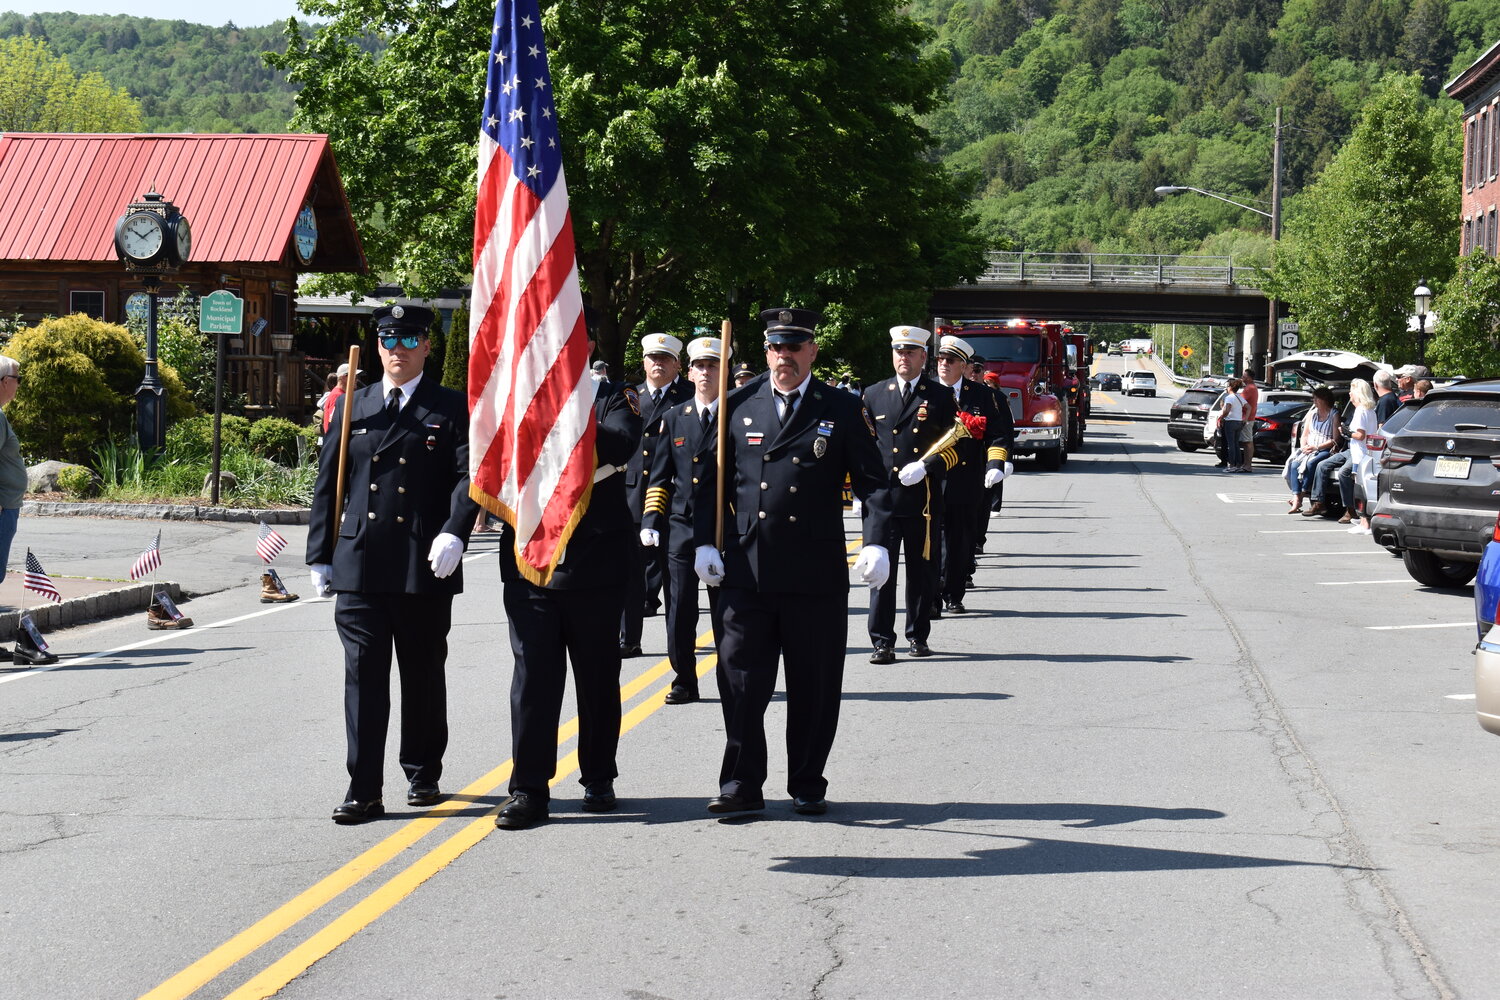 Members of the Roscoe-Rockland Fire Department march down Stewart Avenue. The Memorial Day committee set boots with flags and photos of deceased veterans along the parade route.